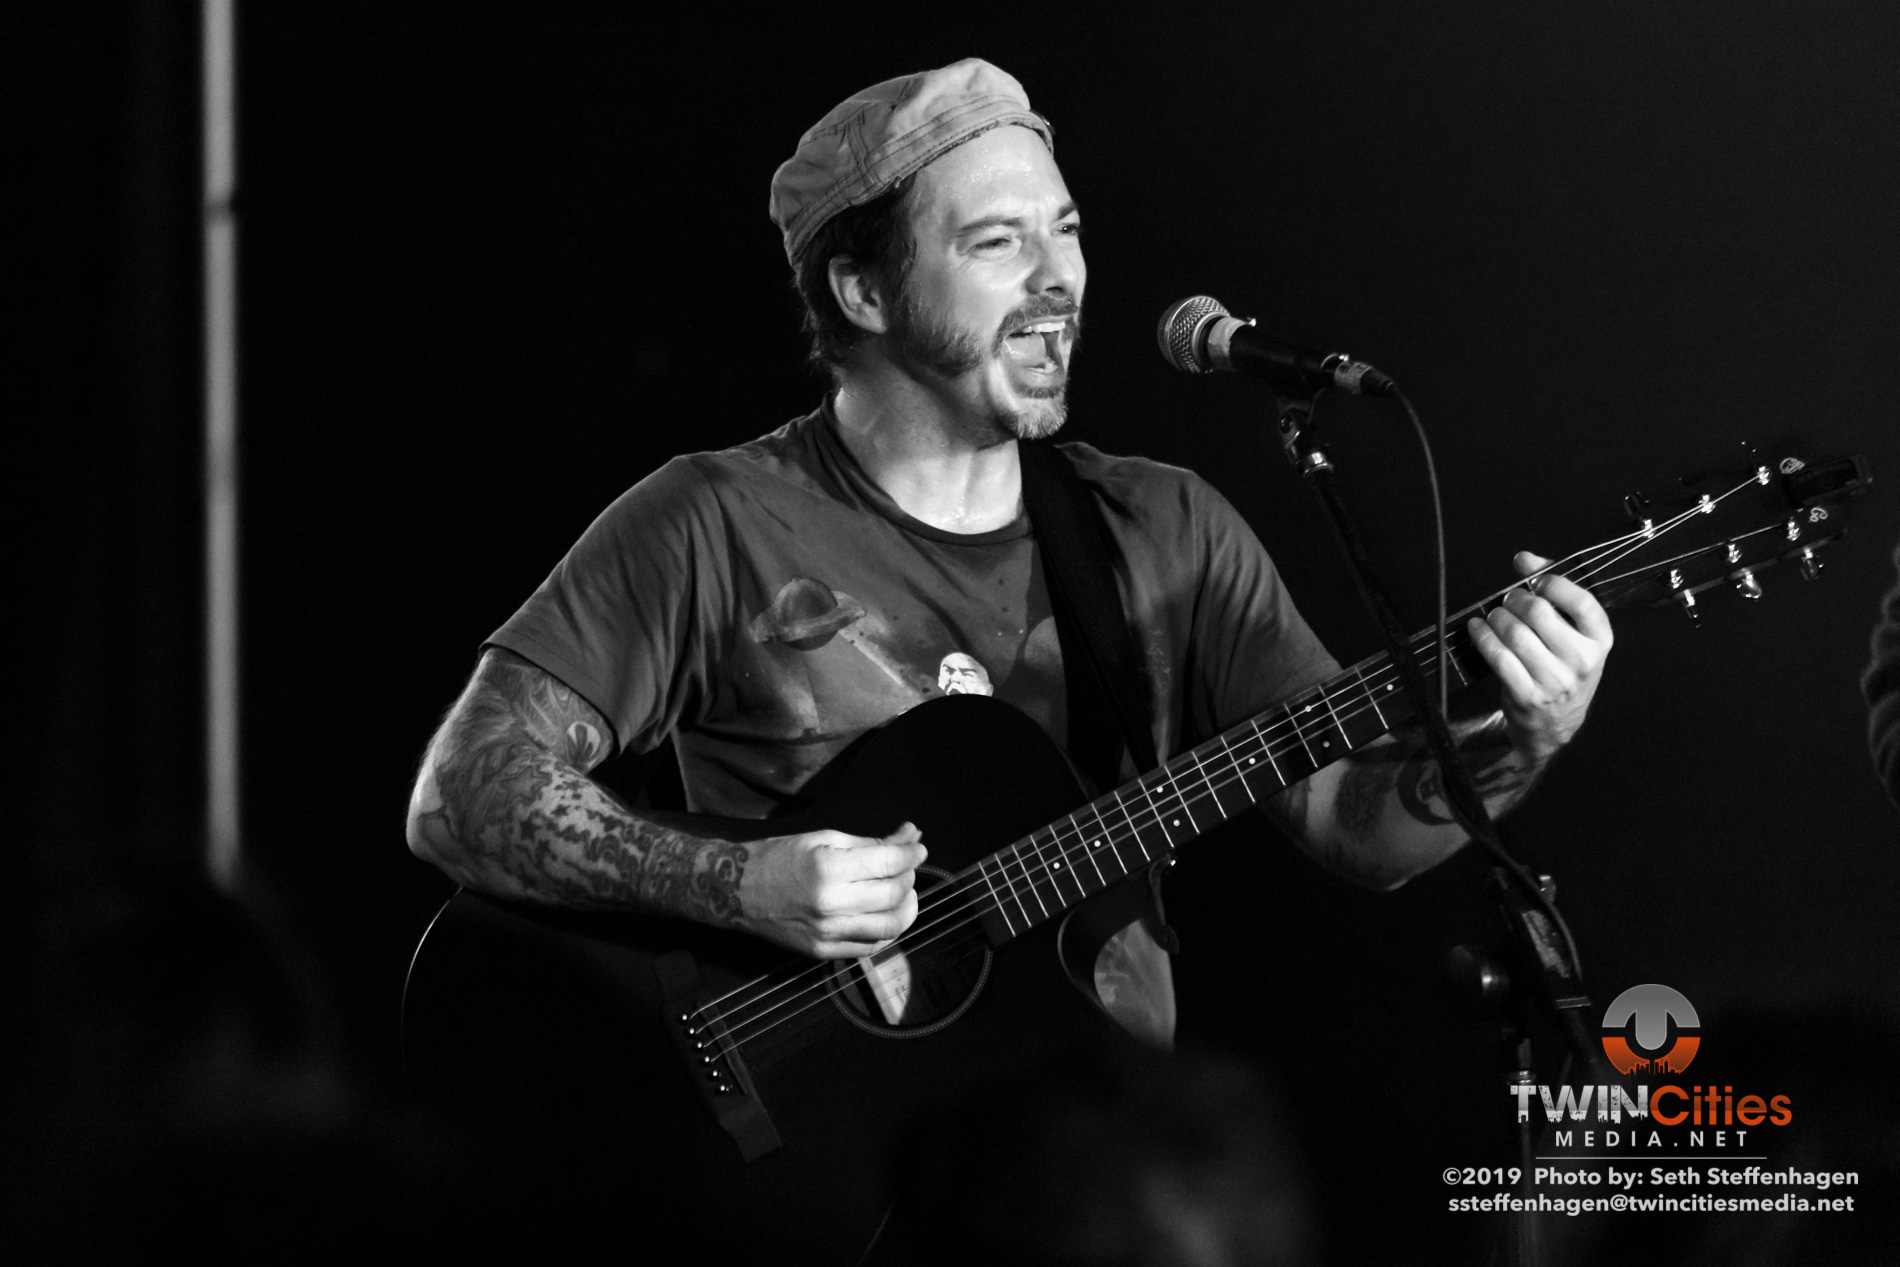 January 16, 2019 - Minneapolis, Minnesota, United States -  Harley Poe live in concert at the Skyway Theatre, Studio B opening for Amigo The Devil.

(Photo by Seth Steffenhagen/Steffenhagen Photography)